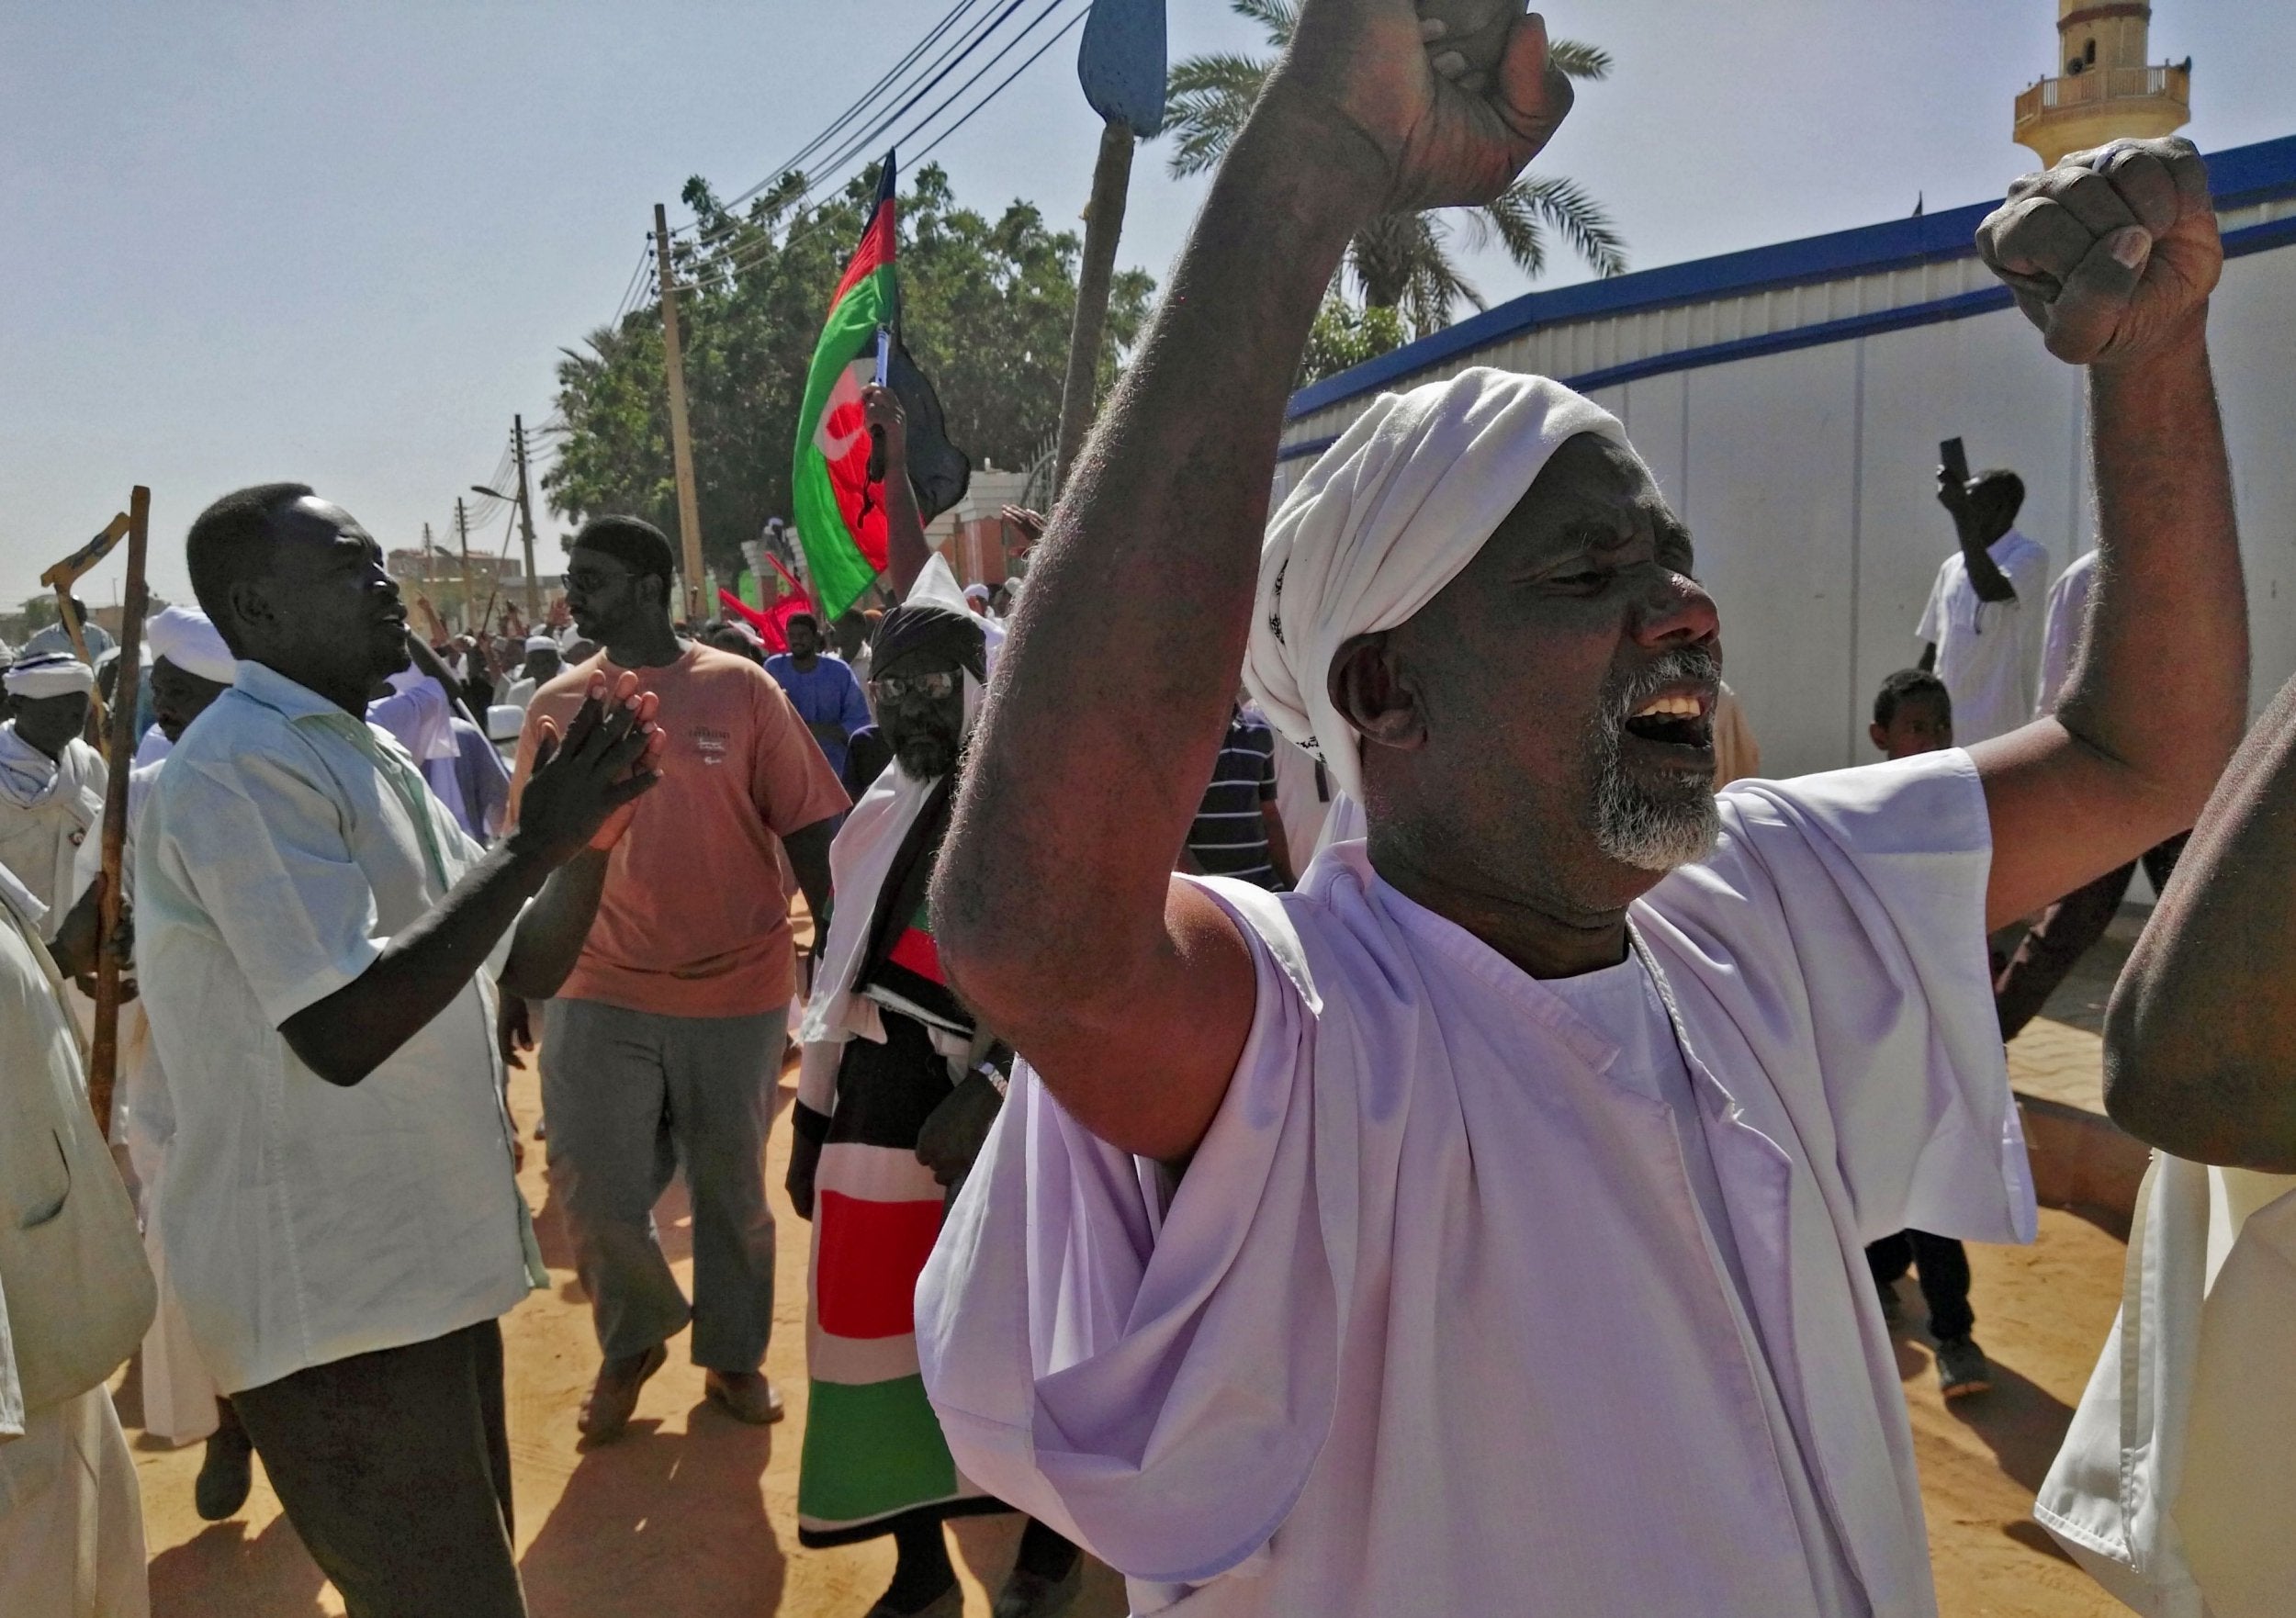 Sudanese men shout slogans during an anti-government protest following Friday noon prayers on 18 January 2019